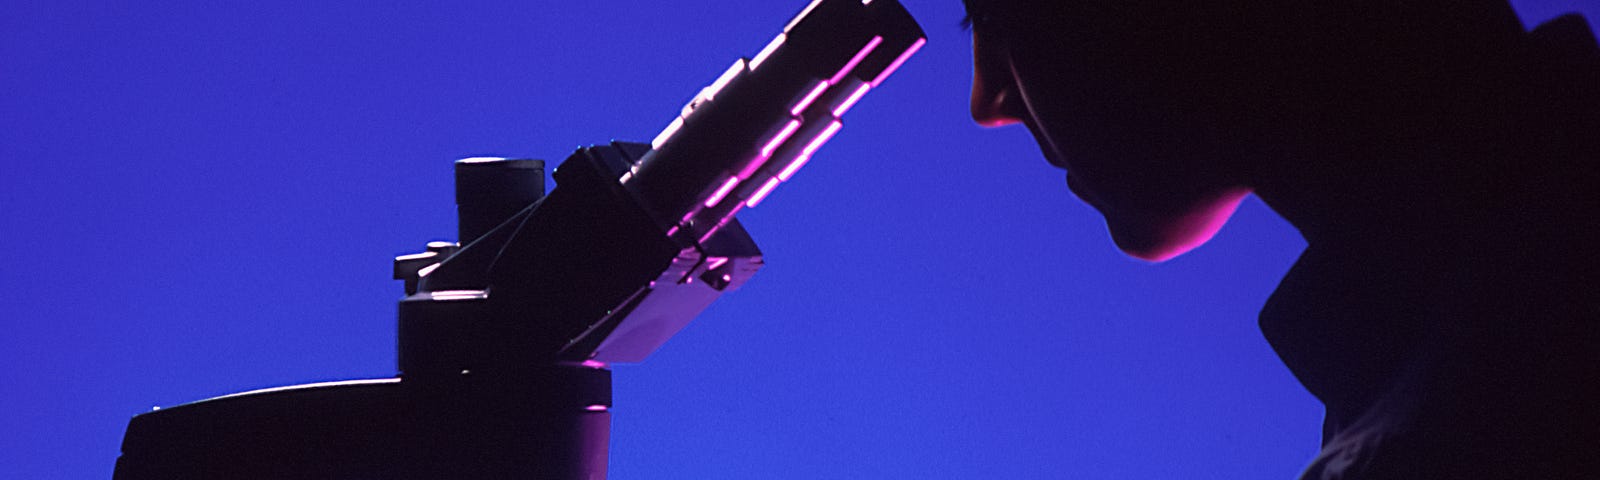 Shadow image on blue background of person in profile peering through microscope.